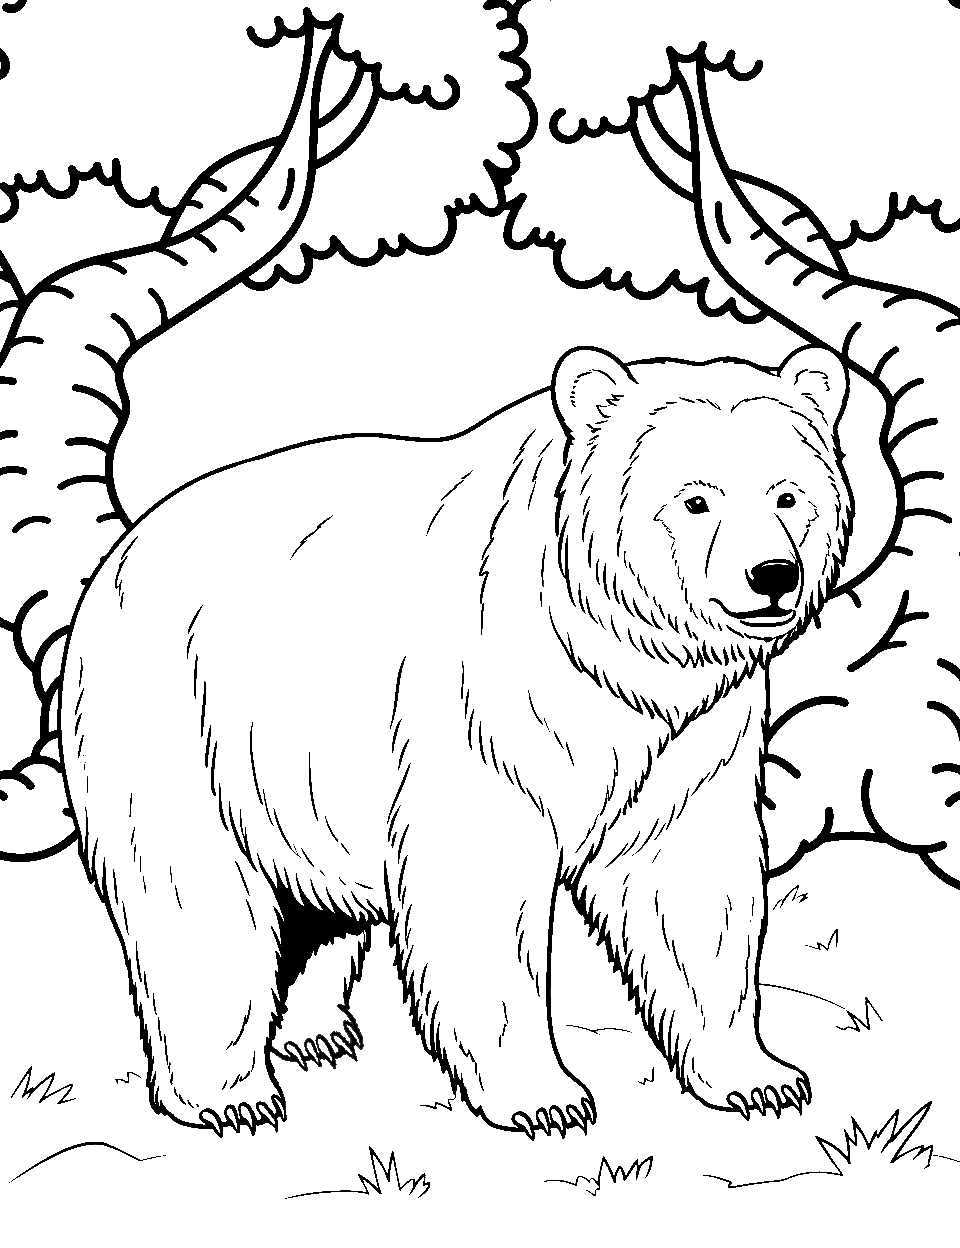 Realistic Brown Bear Coloring Page - A detailed brown bear standing majestically in the forest clearing.